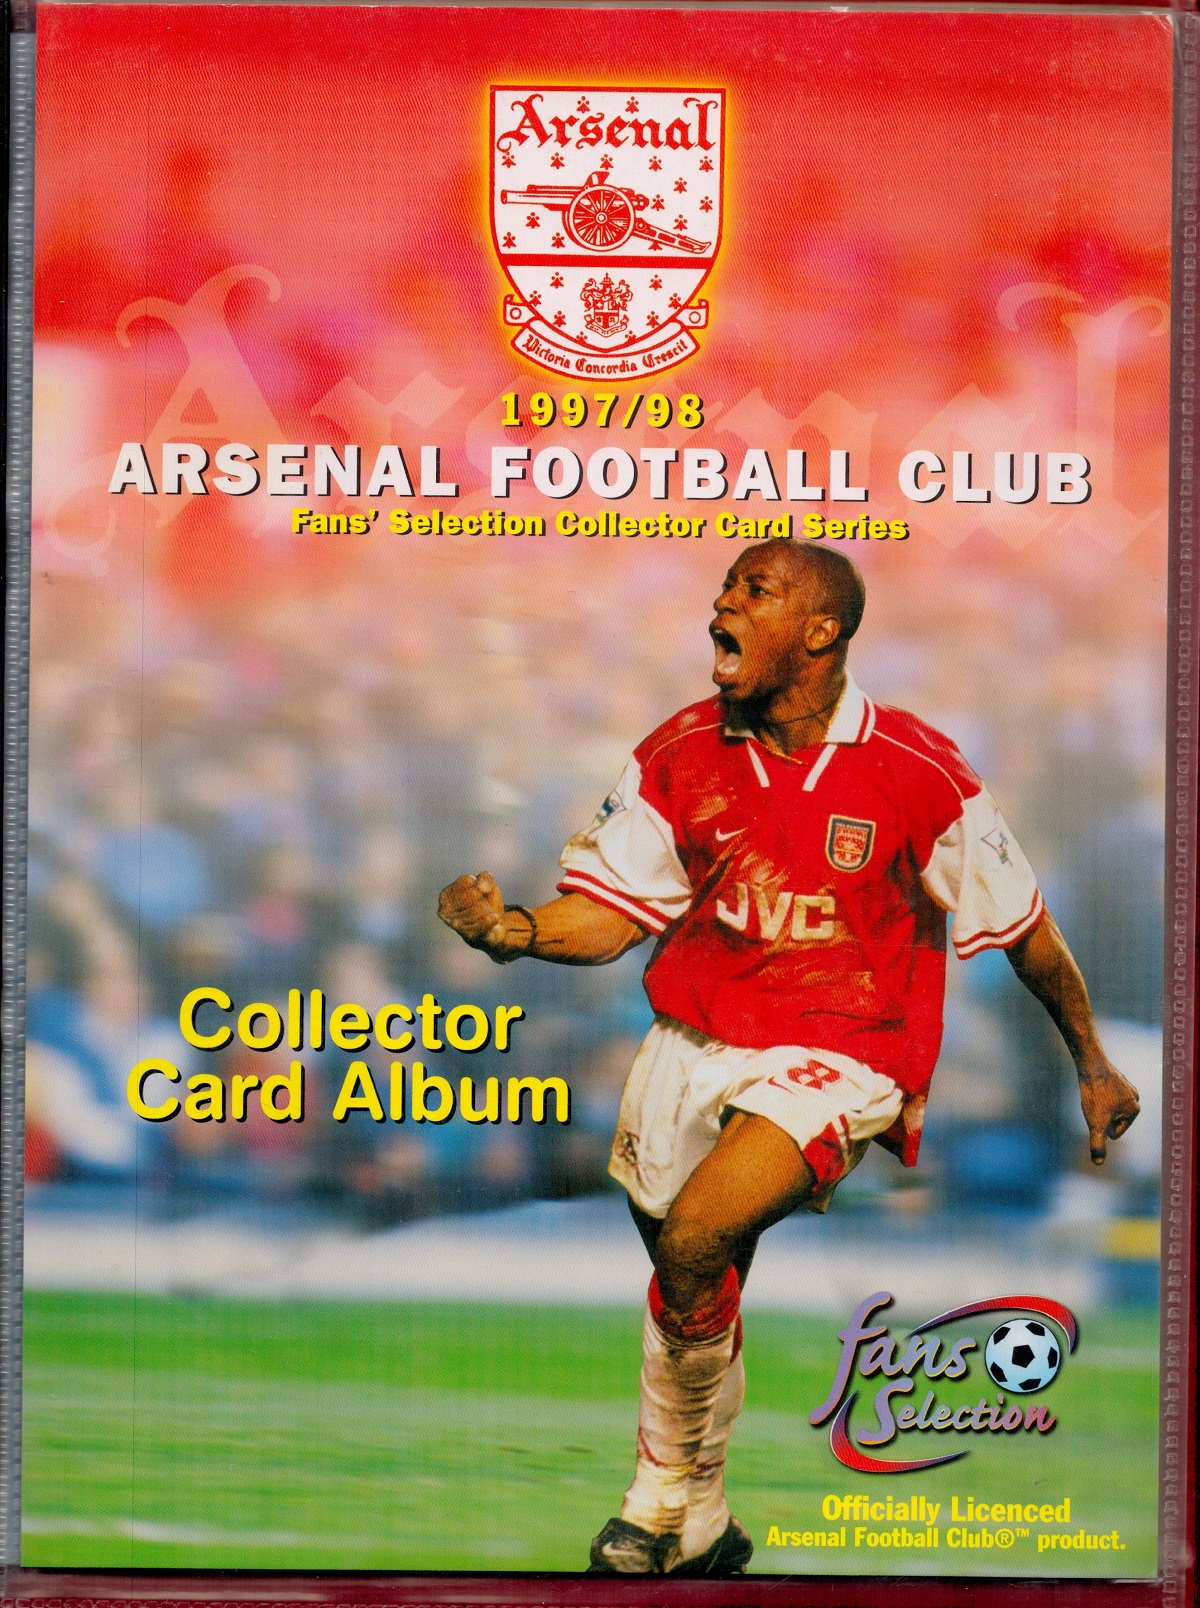 Arsenal FC Trading Card Collectors Album Complete Set from 1997/98 Season. 1-90 Complete Set.